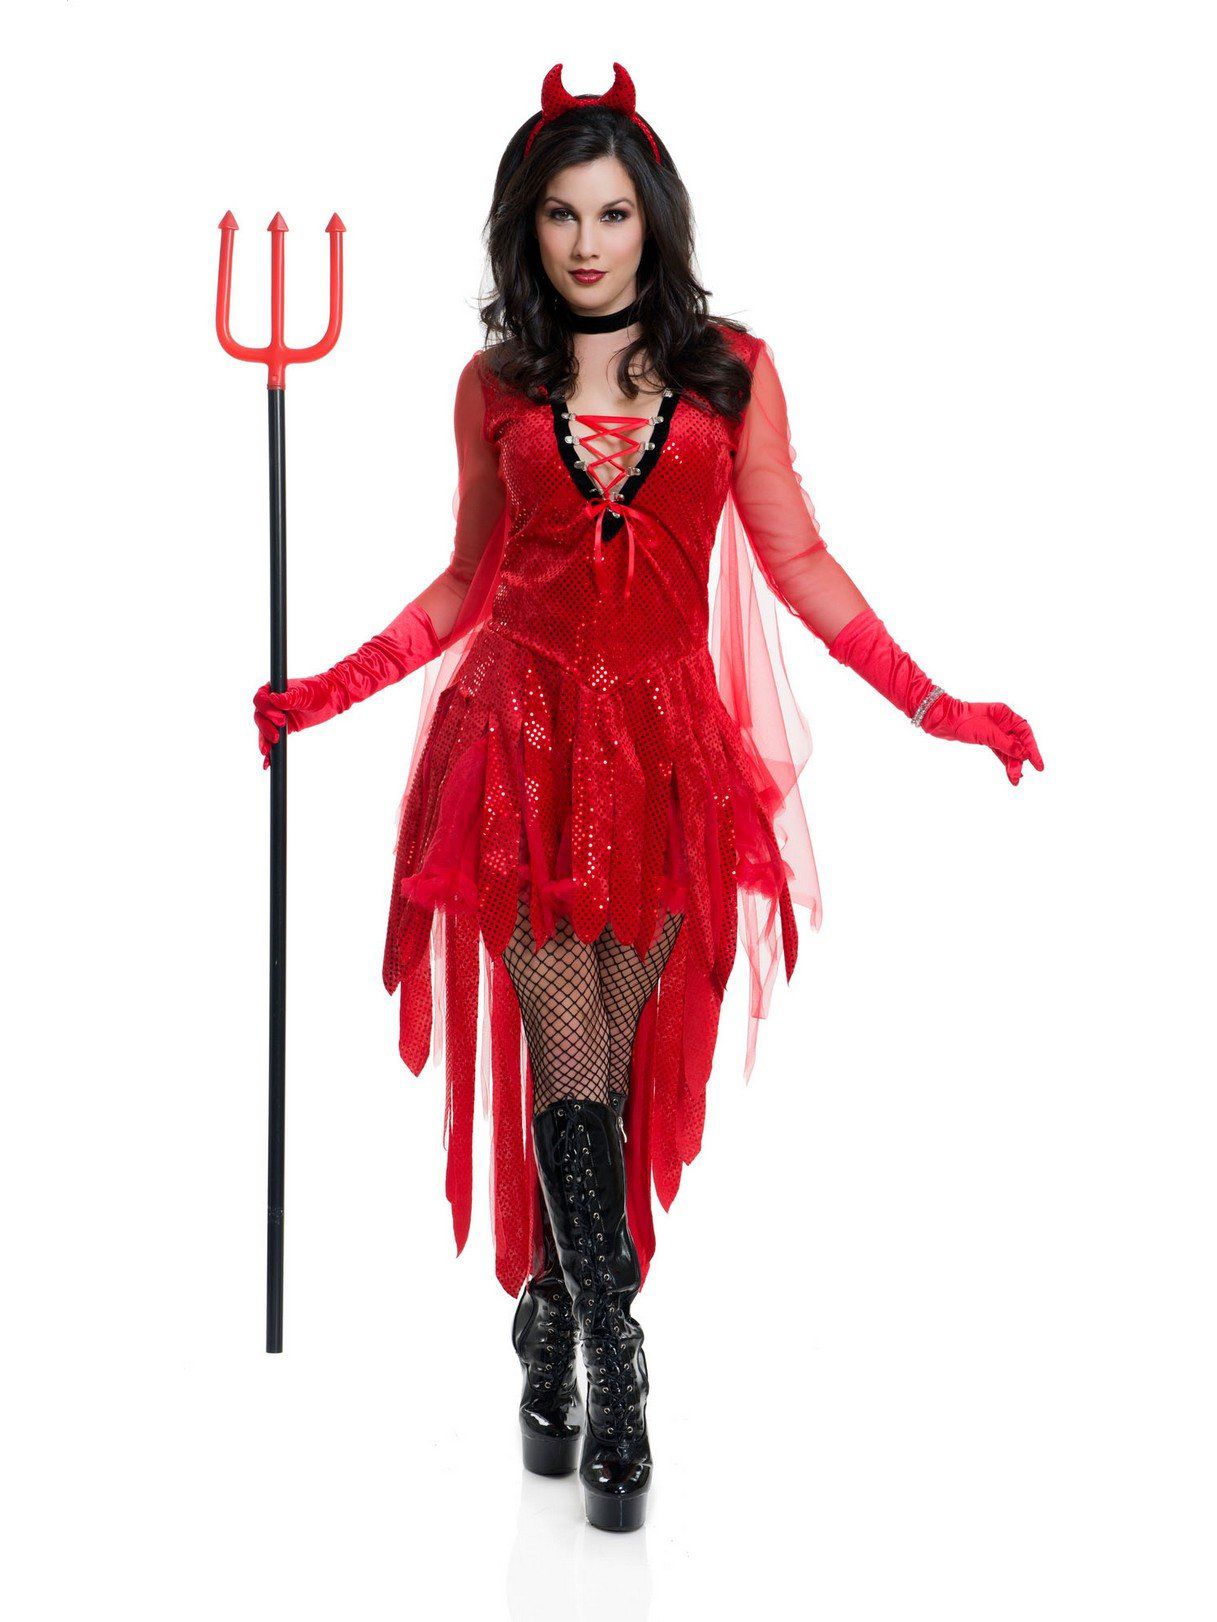 Women's Red Hot Lace Up Devil Costume - costumes.com